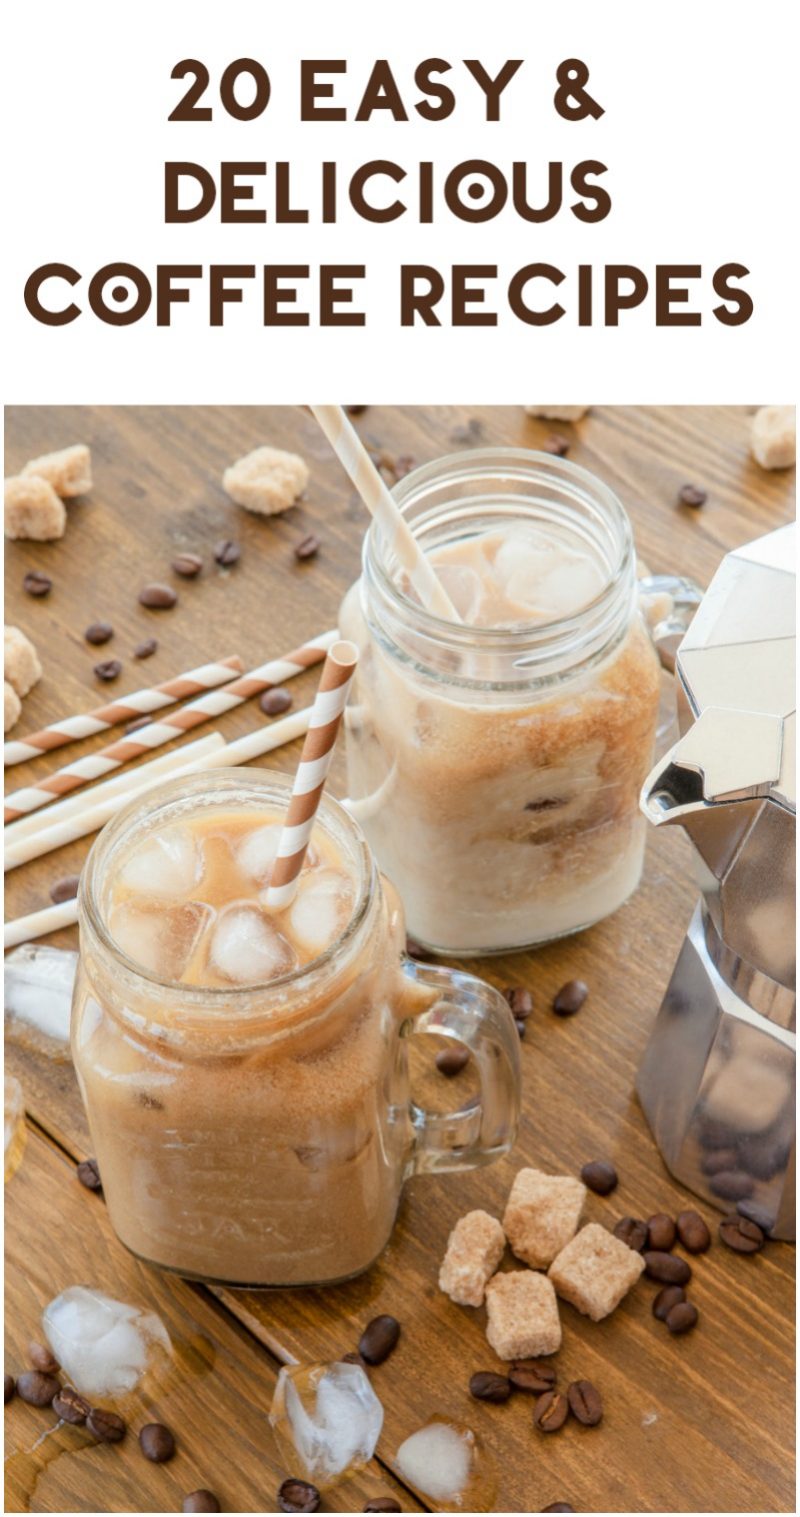 Feeling a bit drained and wiped out from all the holiday excitement? Perk up (pun intended) with these 20 delicious and easy coffee recipes! From seasonal Gingerbread and Eggnog coffee to Iced Mocha Lattes, you'll find something yummy to start your day right!